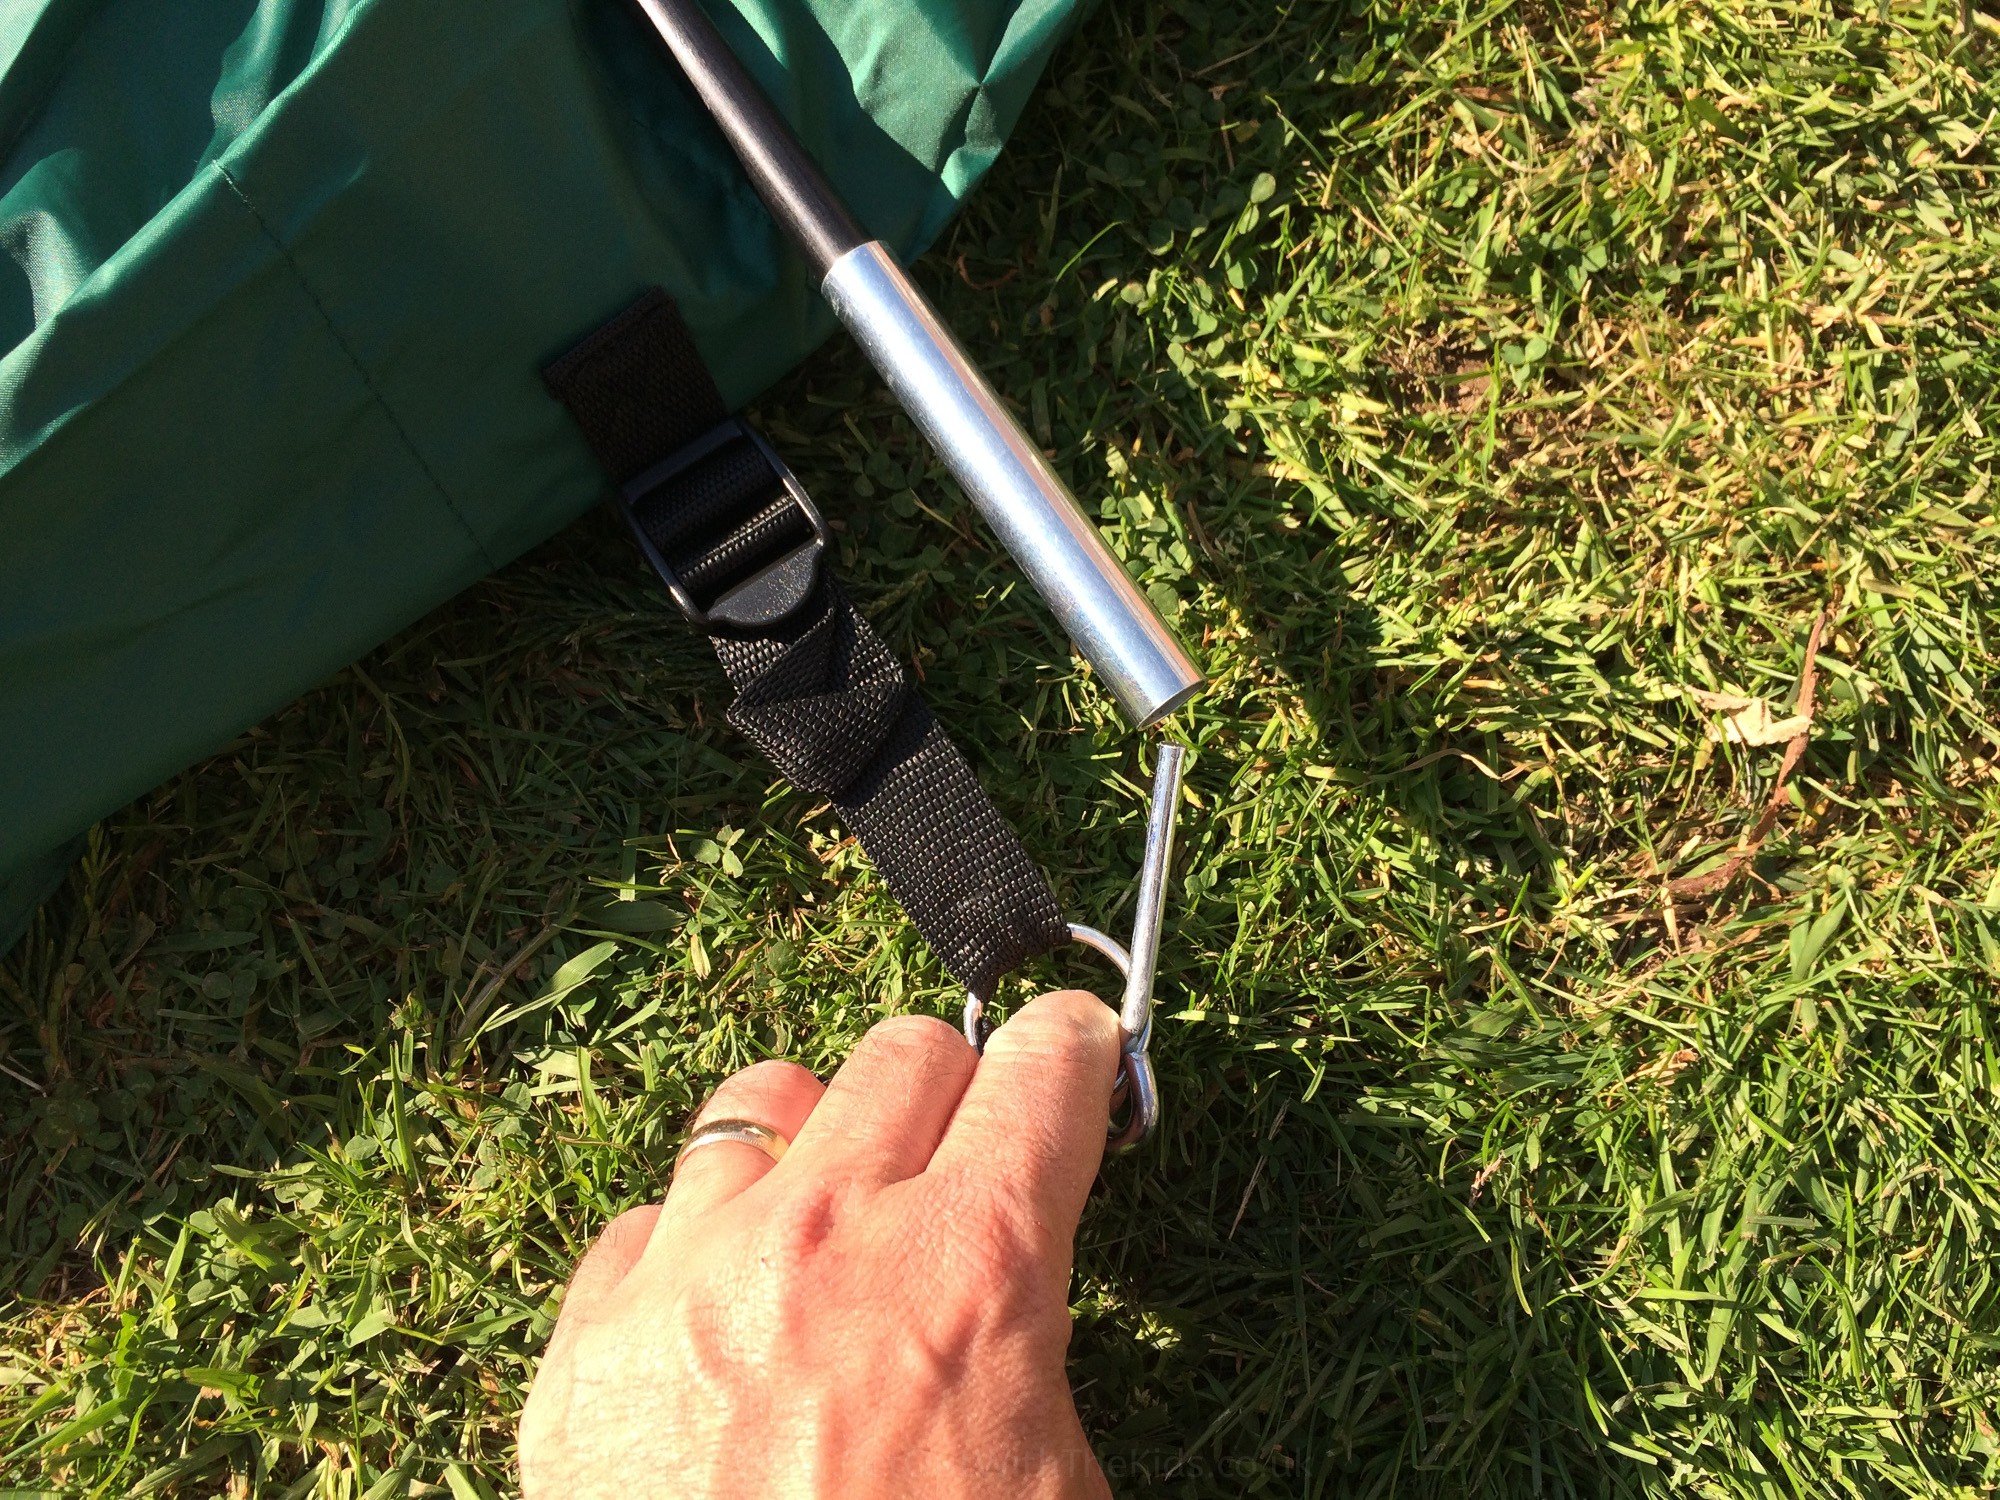 Securing the tent poles